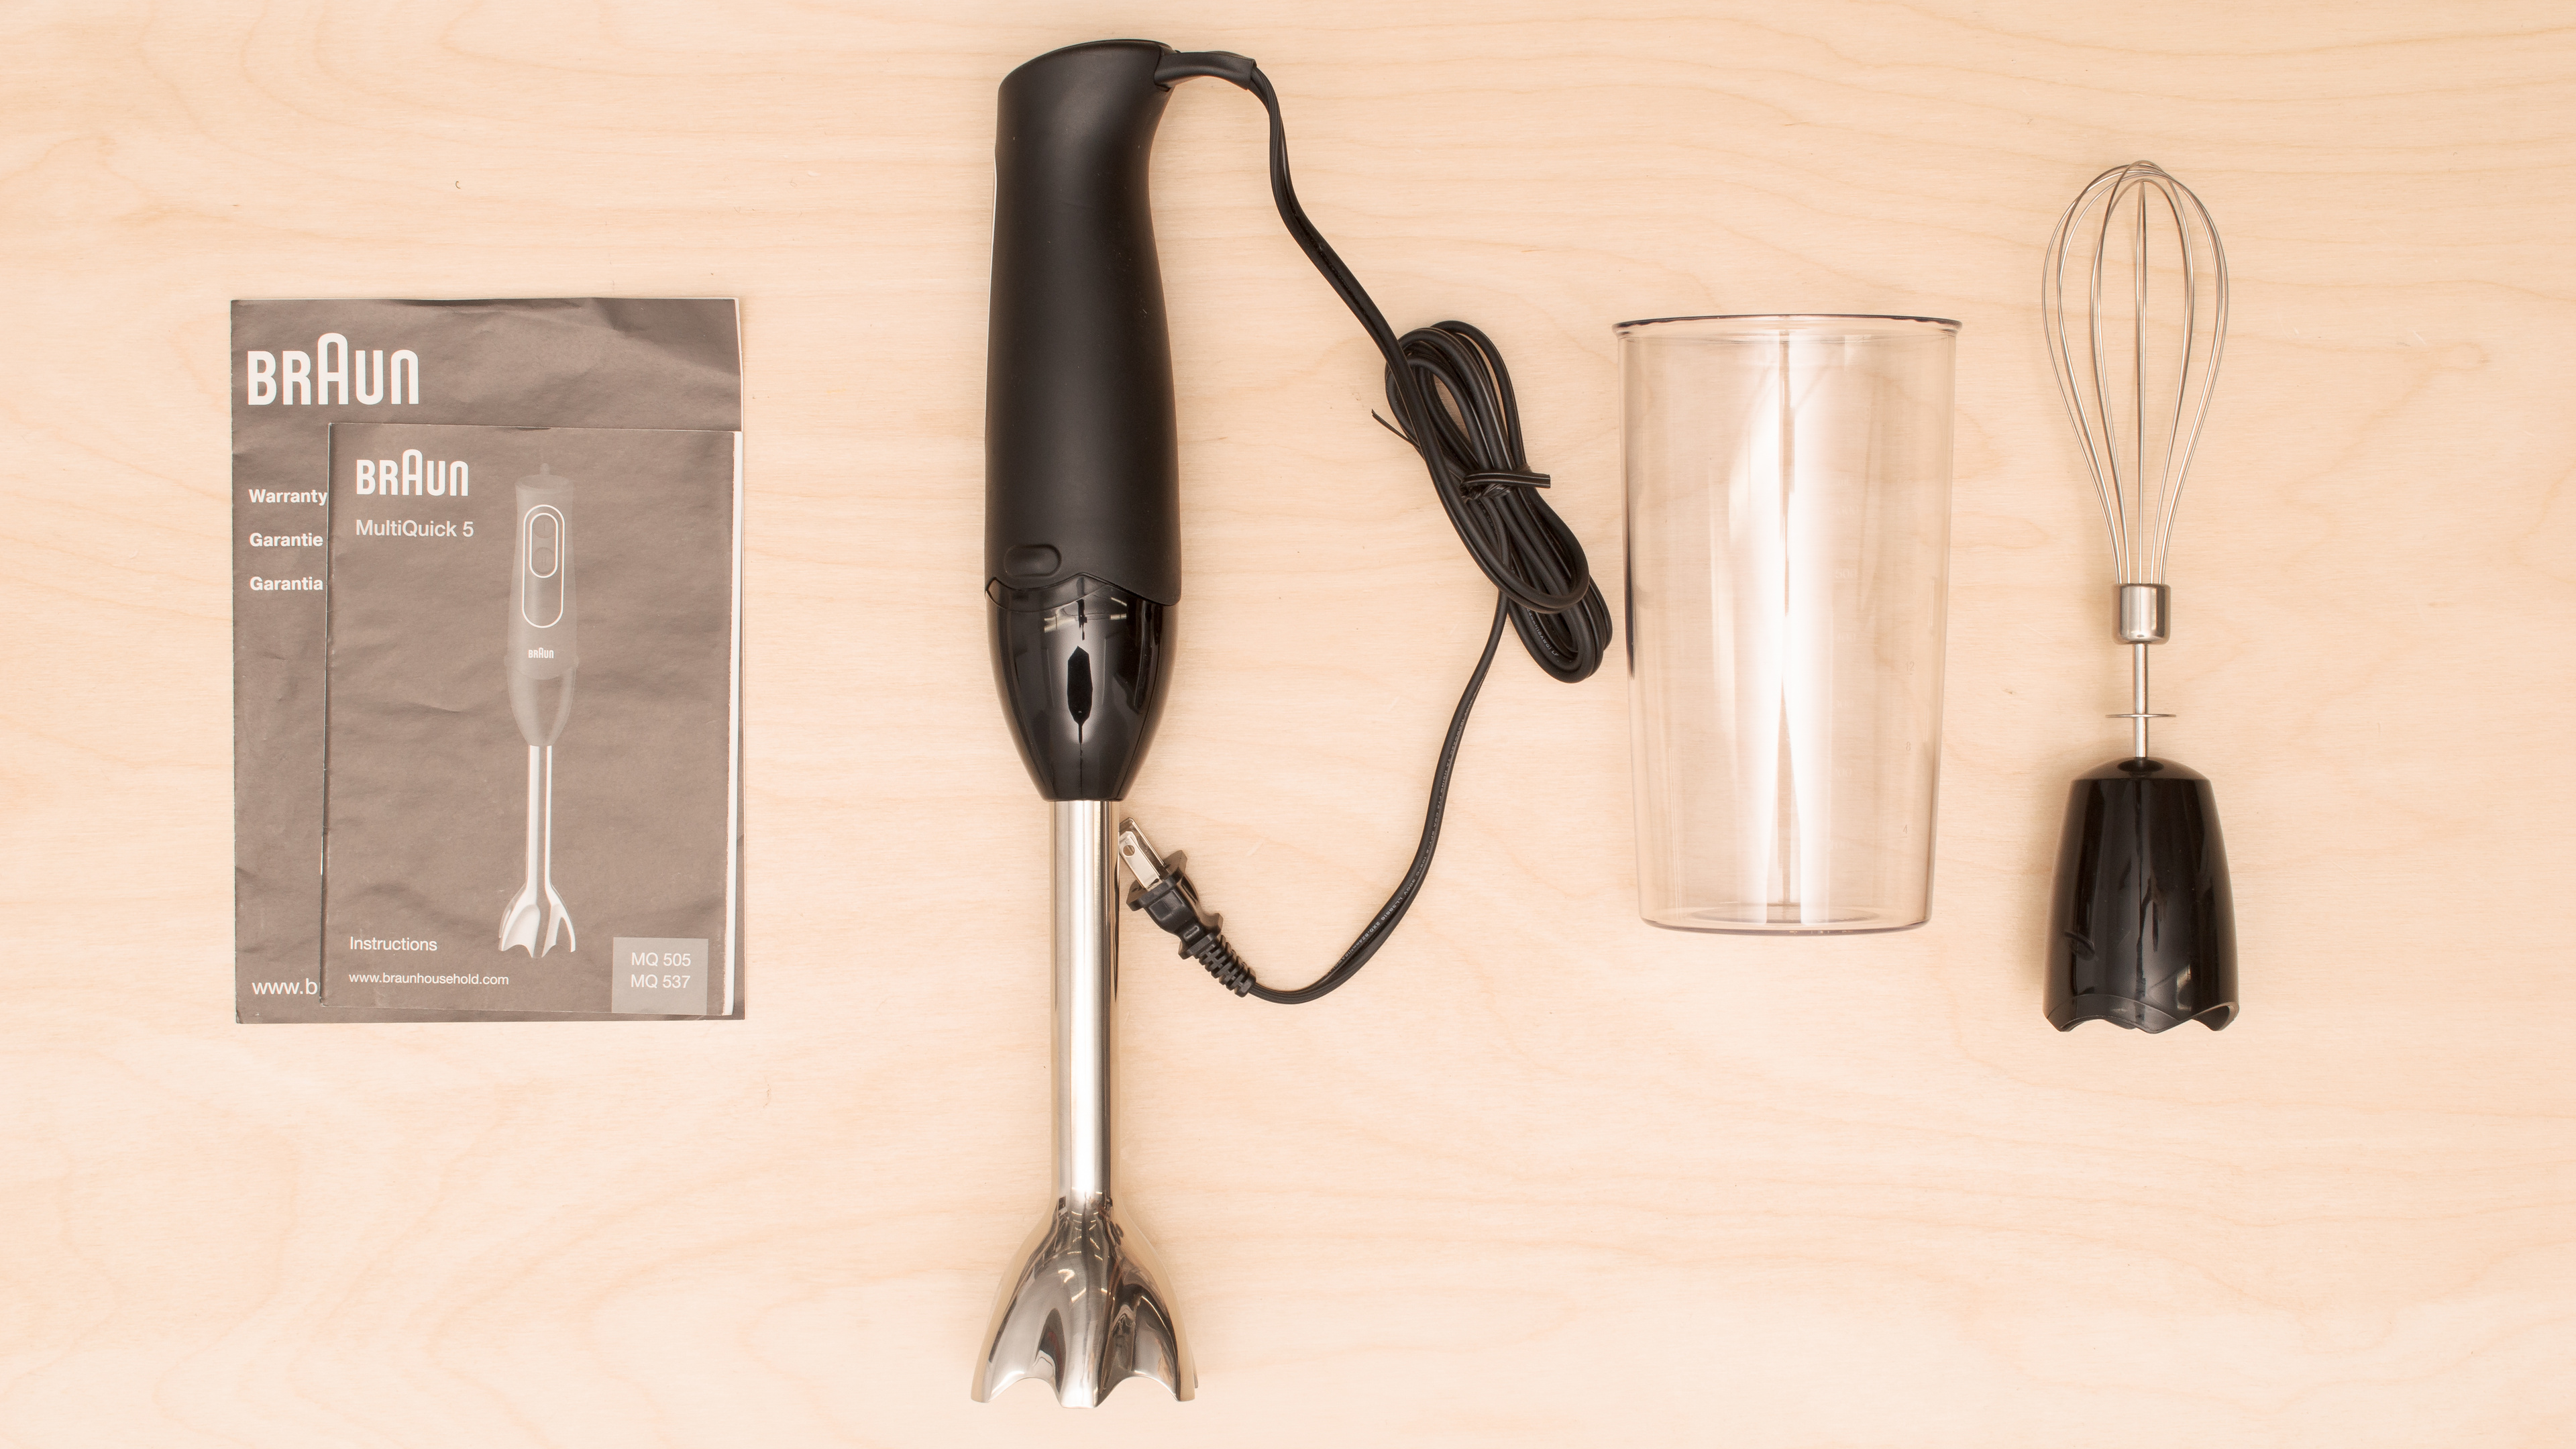 Some common accessories for immersion blenders include blending beakers and whisk attachments (Braun MultiQuick 5)